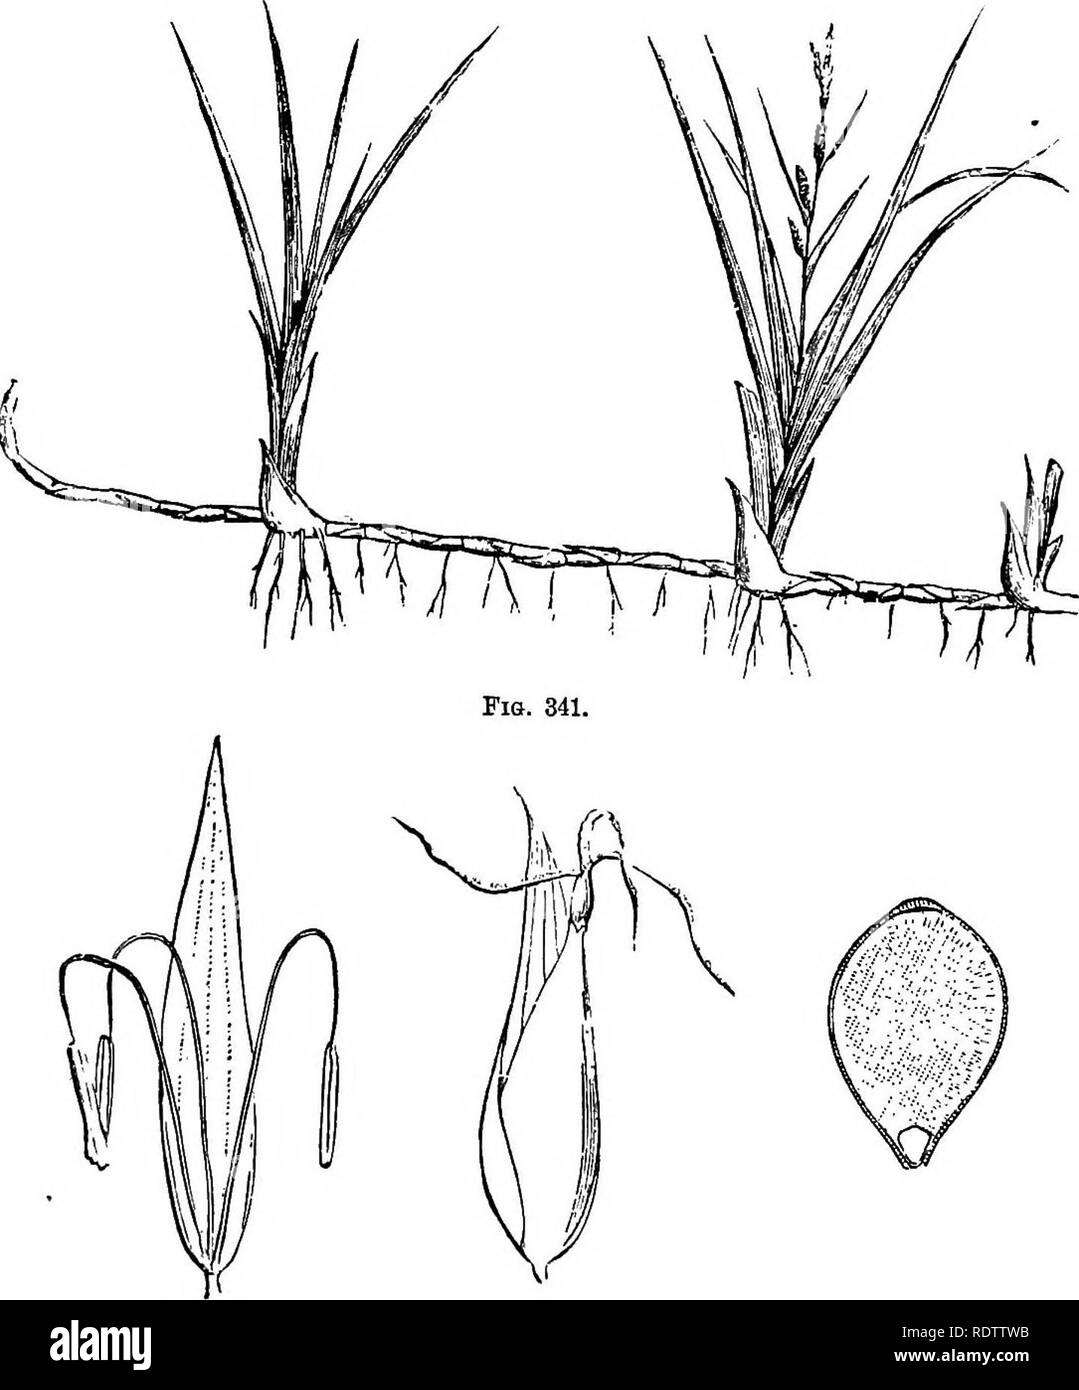 . Botany for high schools and colleges. Botany. 456 BOTANY. merce are made. It is cultivated extensively in the Southern United States, Cuba, Brazil, and, in fact,, in all warm countrips of tlie world. Pigs. 341-4.—Illustrations of Carex.. Fio. 342. Fig. 843. Fig. 844. Fig. 341.—Underground stem, sending up leafy and flowering stems. Fig. 343.—Male flower. Magnifled. Fig. 843.—Female flower. Magnifled. Fig. 344.—Section of seed. Magnifled. It is a curious fact that while the annual production of cane sugar in the world is now about 4,000,000,000 ponuds, yet five hundred. Please note that these Stock Photo